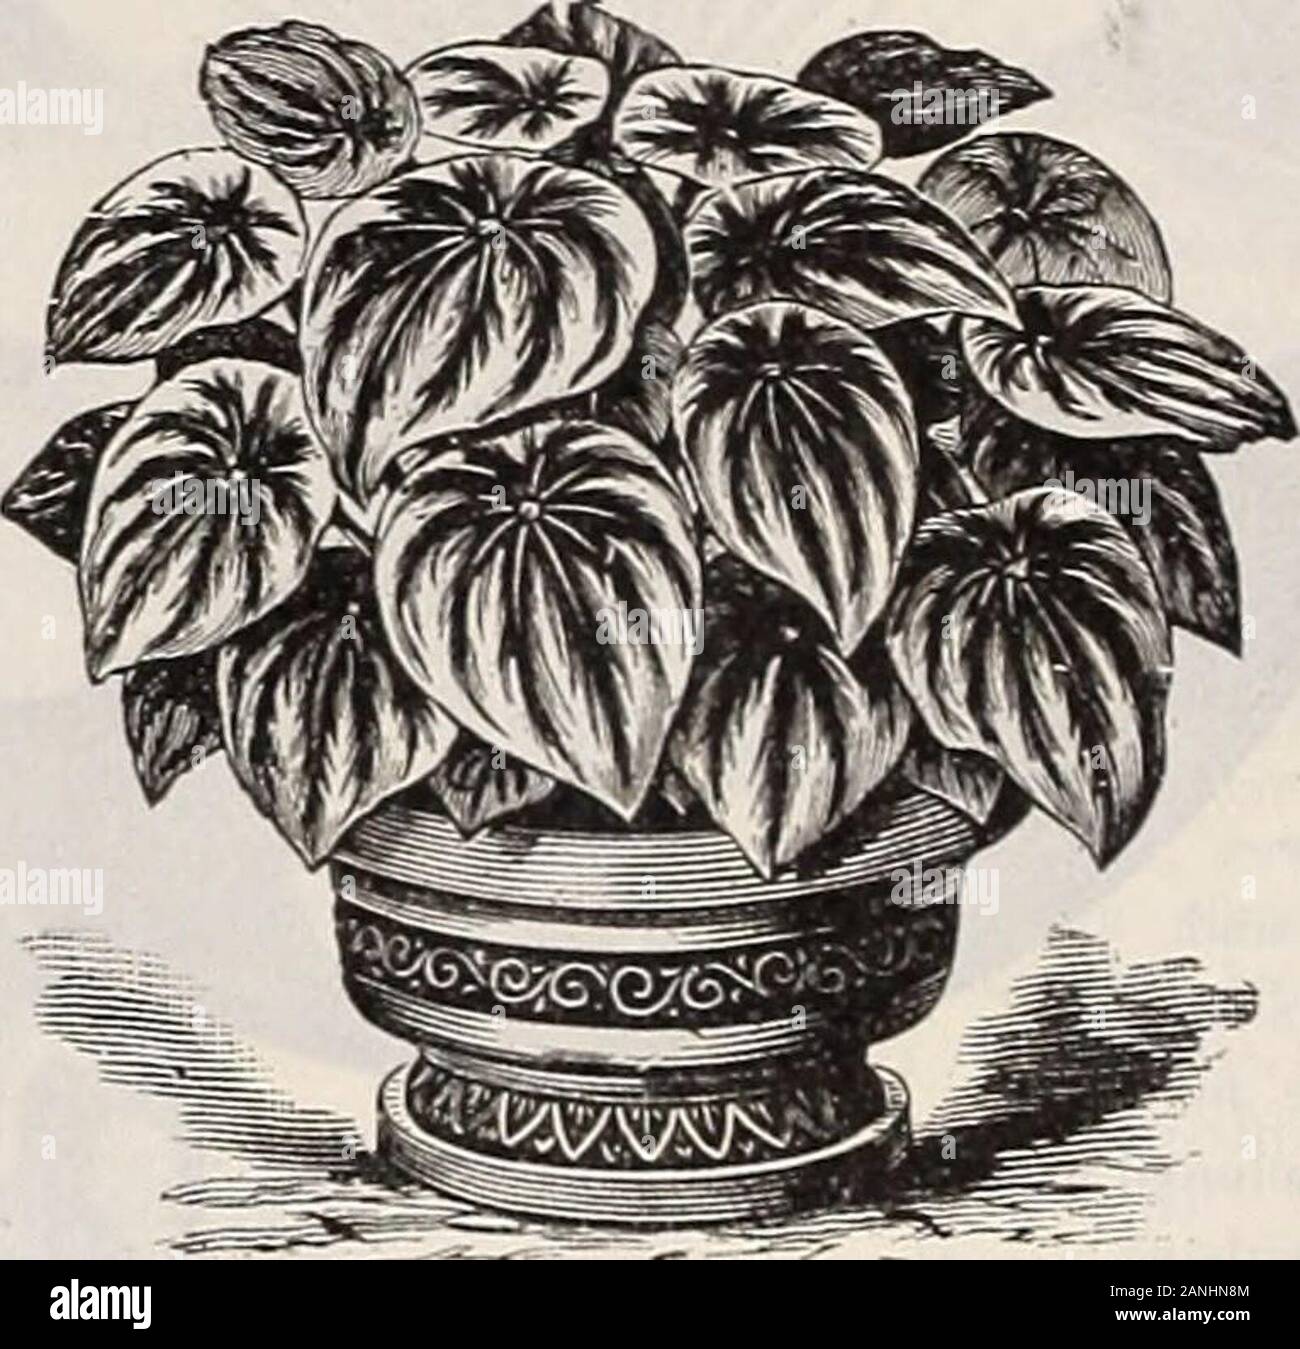 Dreer's 72nd annual edition garden book : 1910 . nce to some of the narrow-leaved warm house Aralias, but of quicker growth. A prettydecorative plant. 50 cts. each, PHVI^LOT.^iXirM. Lindeni. A handsome hothouse plant of easy culture, with at-tractive light green hastate leaves, the broad rib and veinscreamy-white. 75 cts. each, Lindeni Magnificum. A variety with much larger leavesand with tlie variegation more decided in color, $1.00 each. PI.UMBAGO. Capensis. Light lavender-blue.— Alba. Color creamy-white. Coccinea Superba. Long racemes of showy, brilliant, brigh&gt;satiny-carmine flowers, 15 Stock Photo